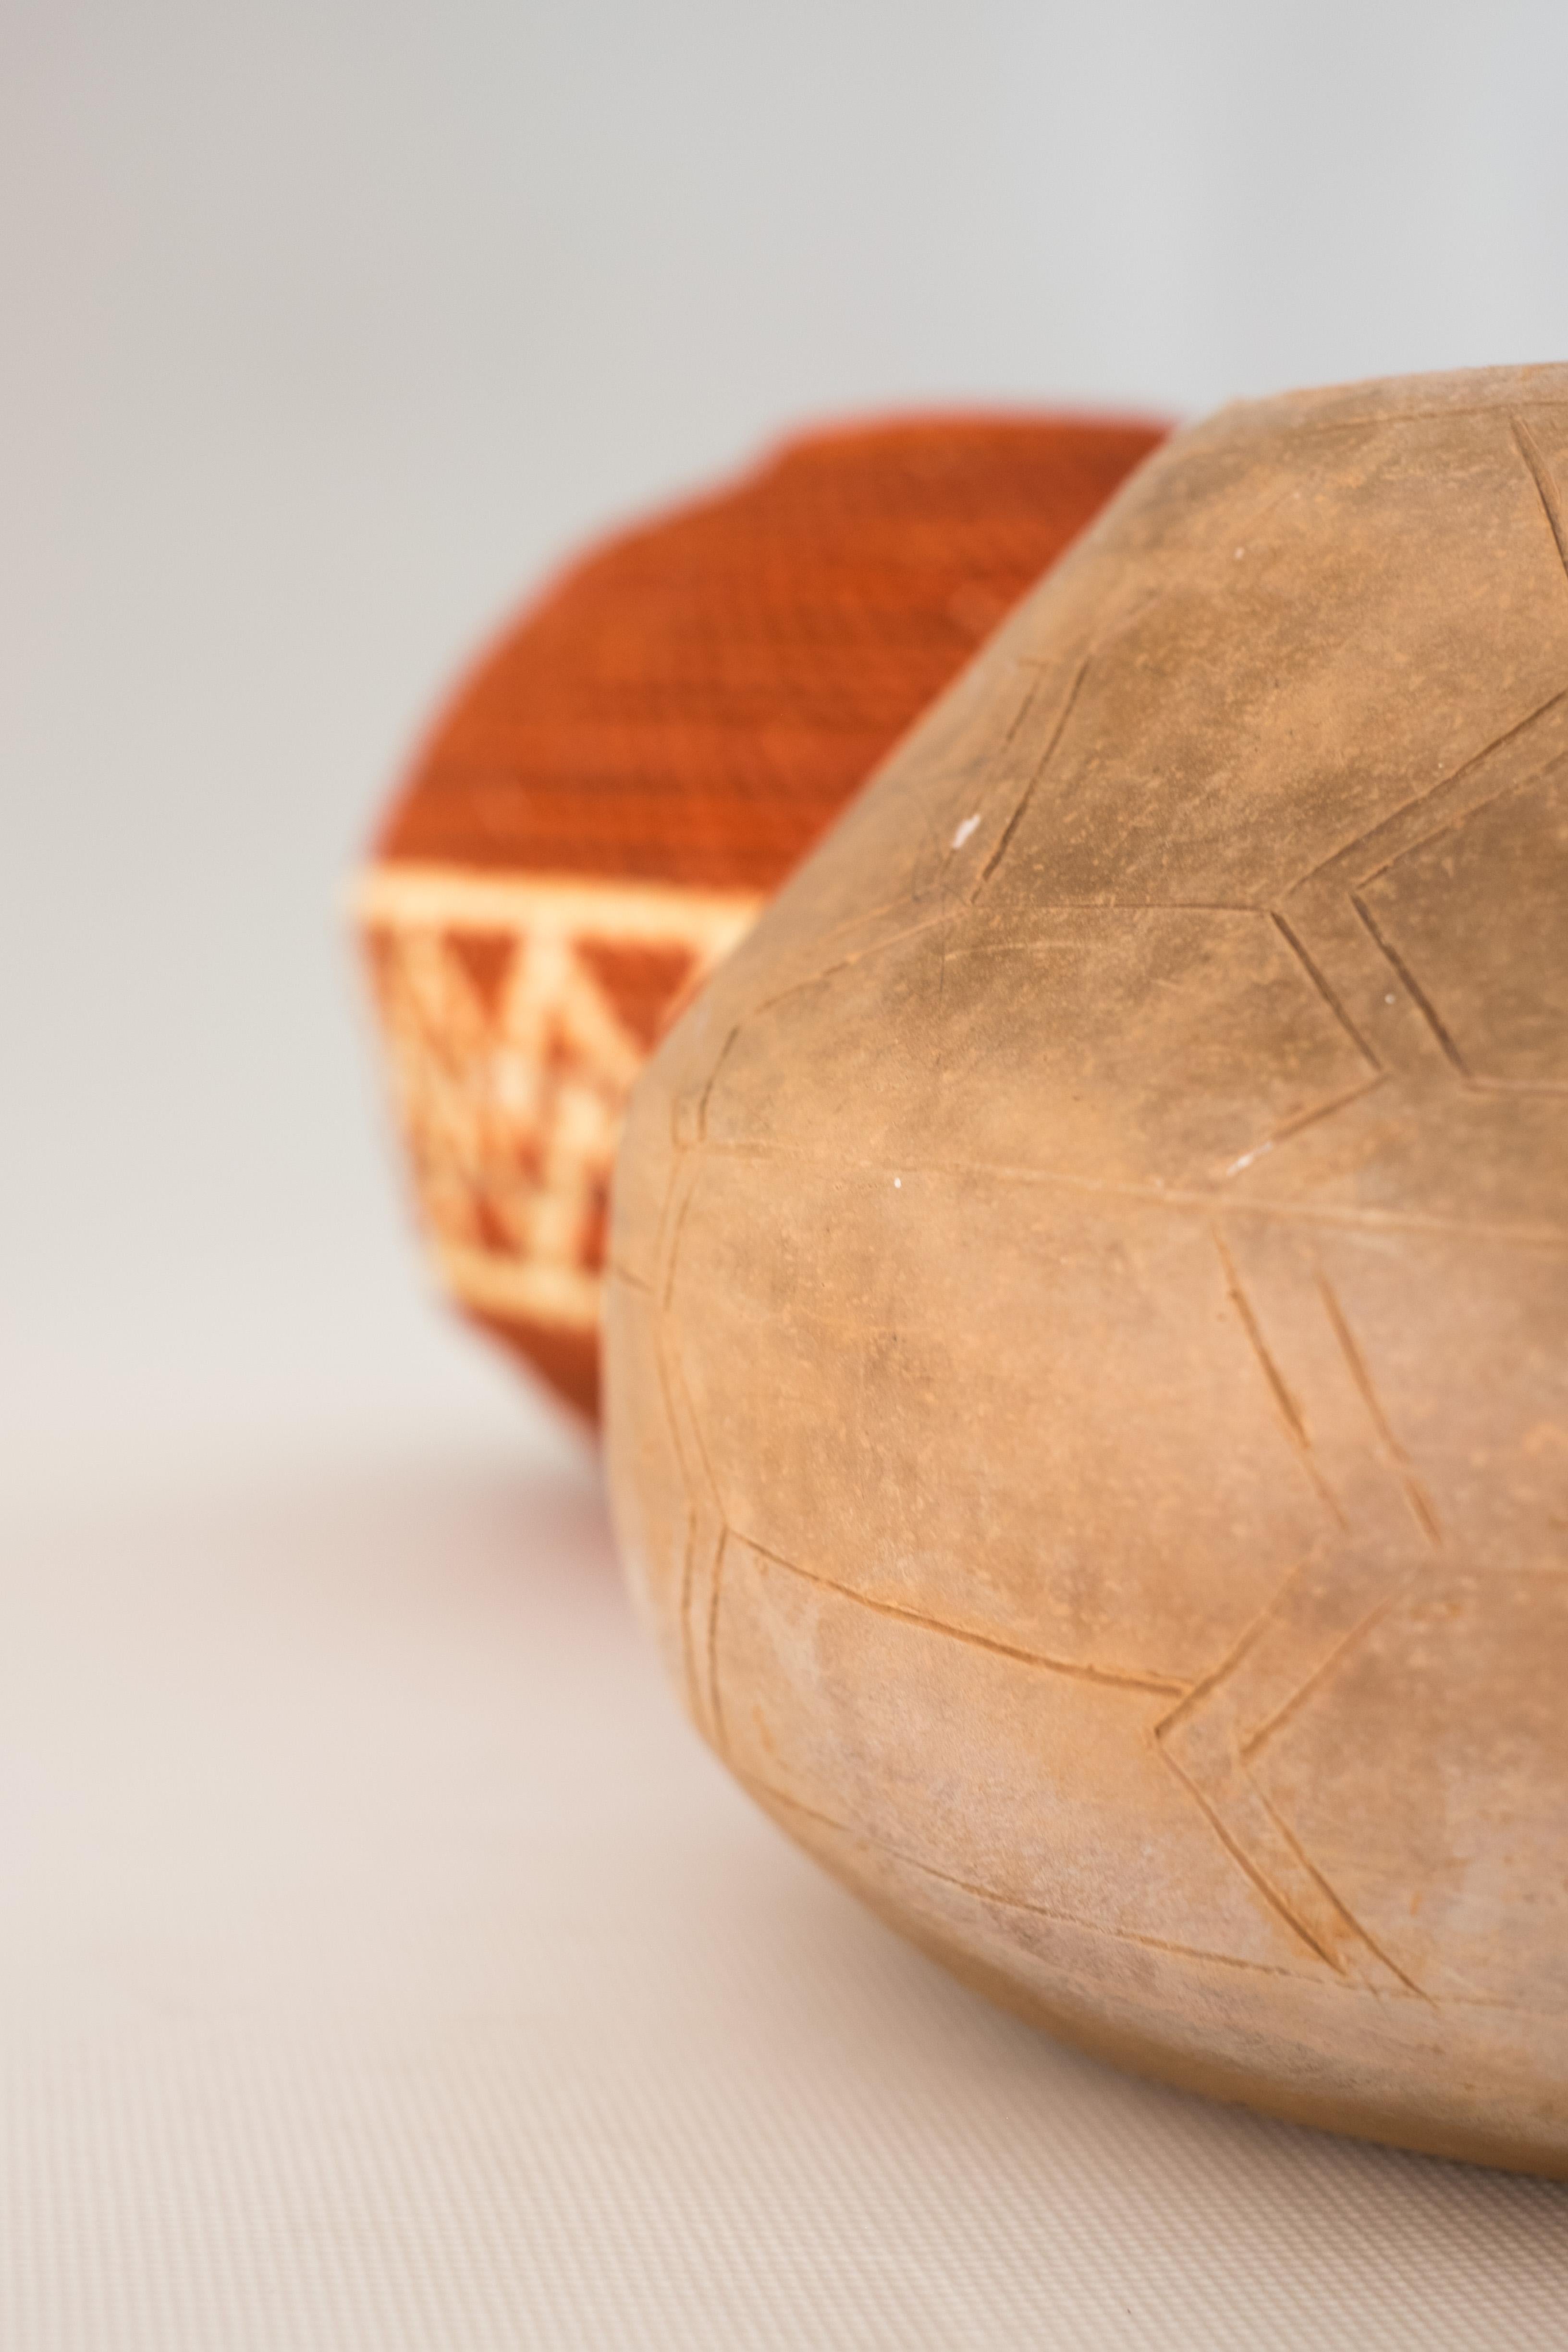 Unique design piece

The Kwasawá Straw and ceramic bowl was first presented in Two Chronicles Exhibition at A CASA Museum, in October 2019 in São Paulo, Brazil.

They are an homage to indigenous ancestry and the importance to understand and